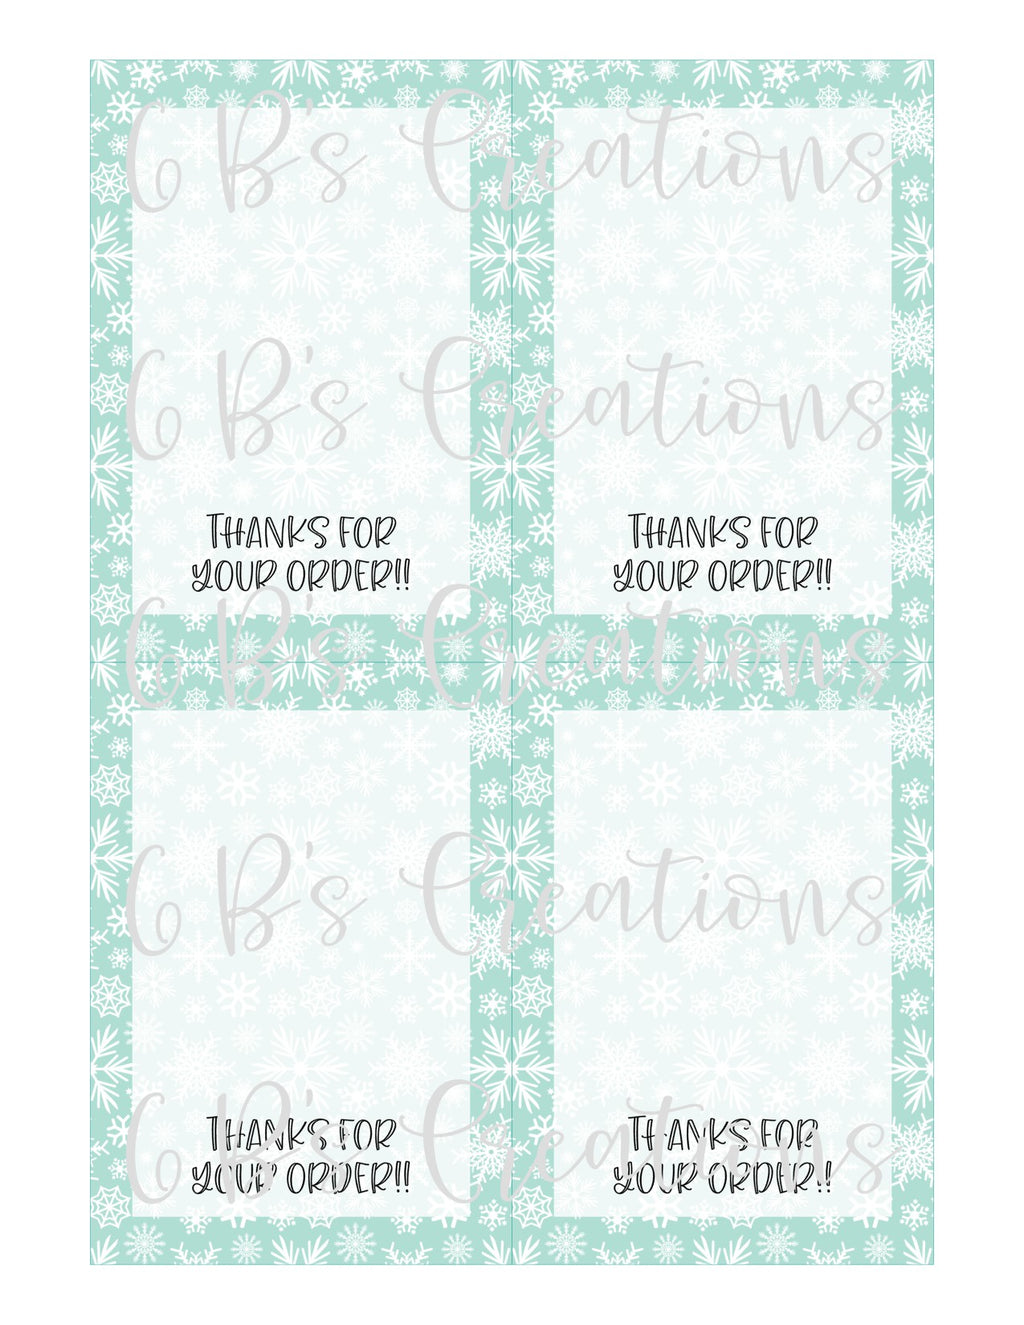 Thanks for your order Printable Tag - Blue Snowflake